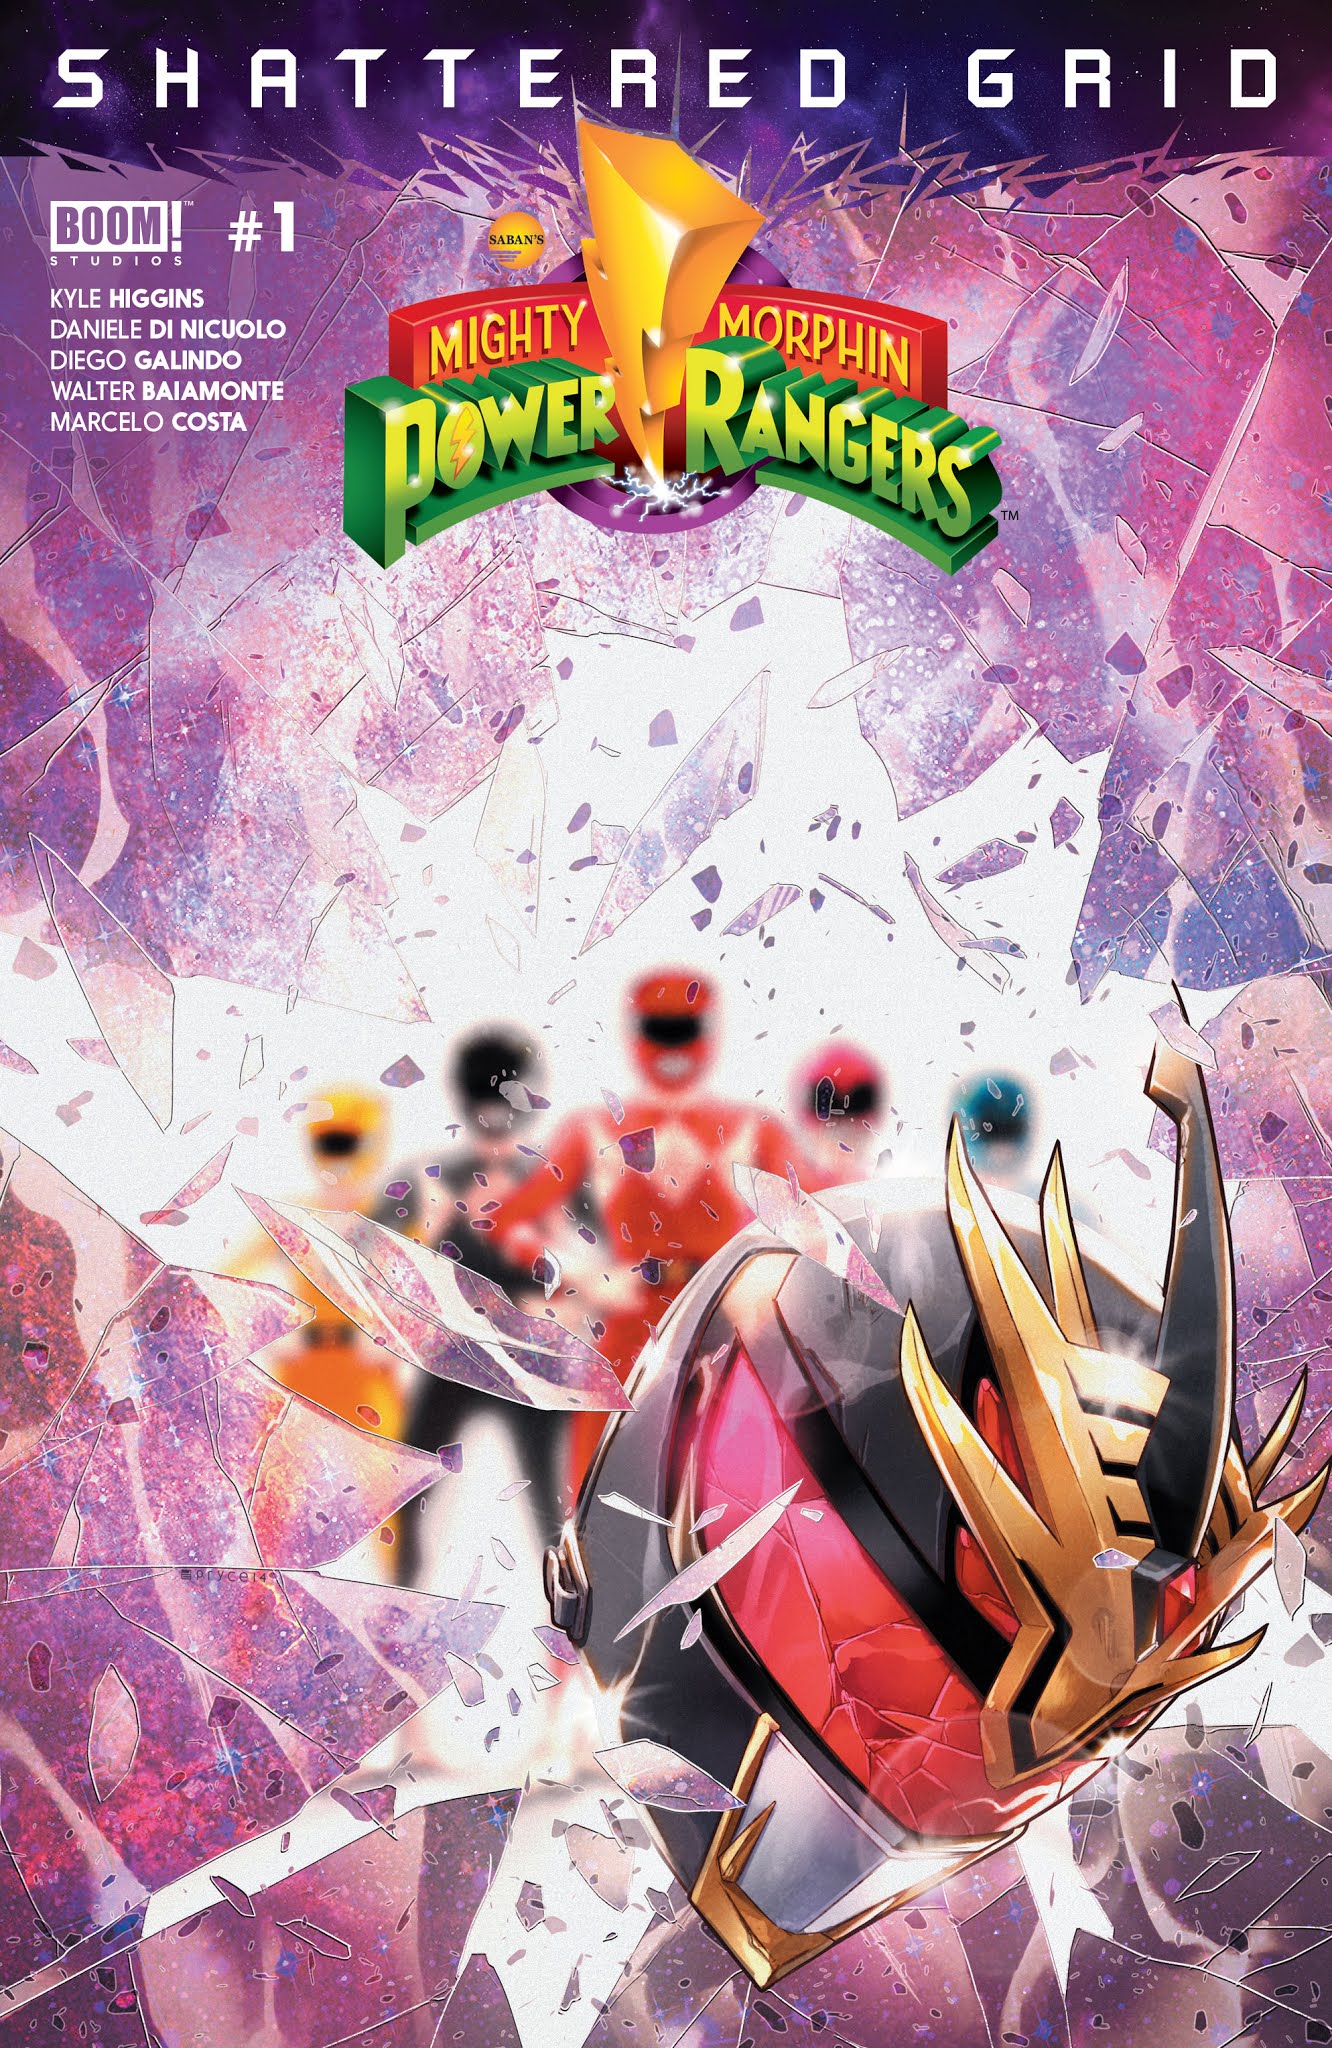 Read online Mighty Morphin Power Rangers: Shattered Grid comic -  Issue # Full - 1